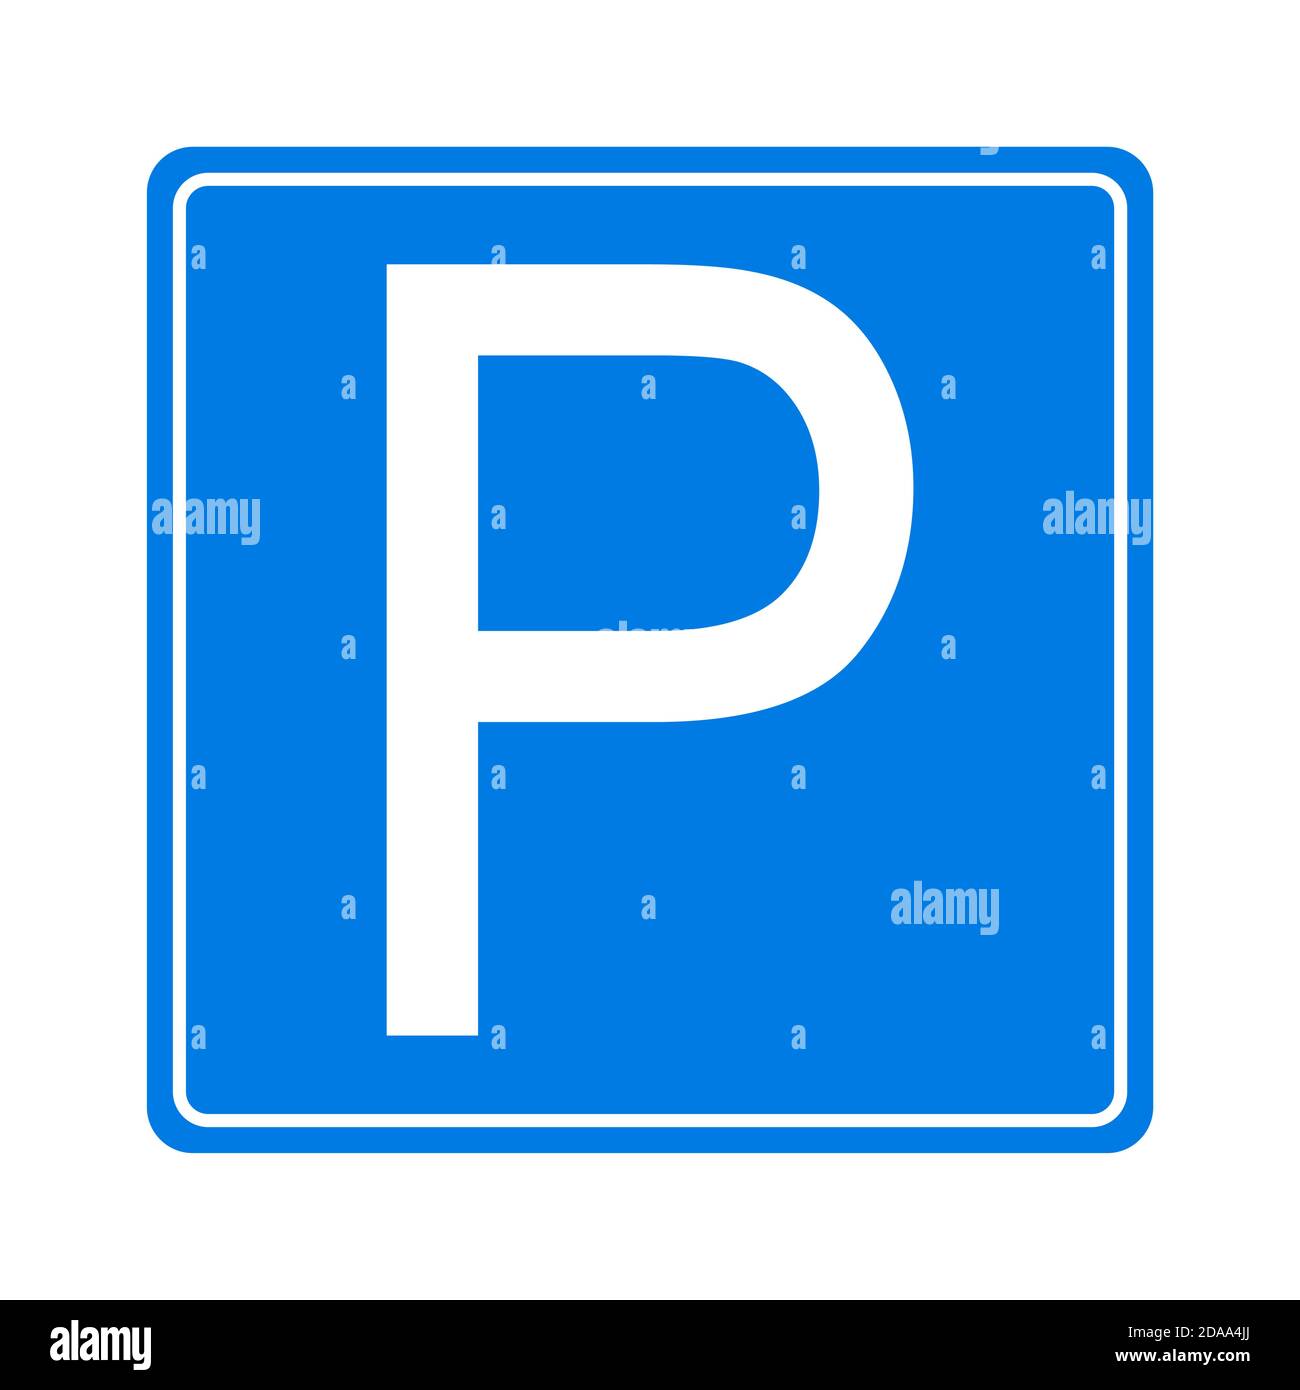 Park icon sign, road symbol. Parking public icon street place. Stock Vector